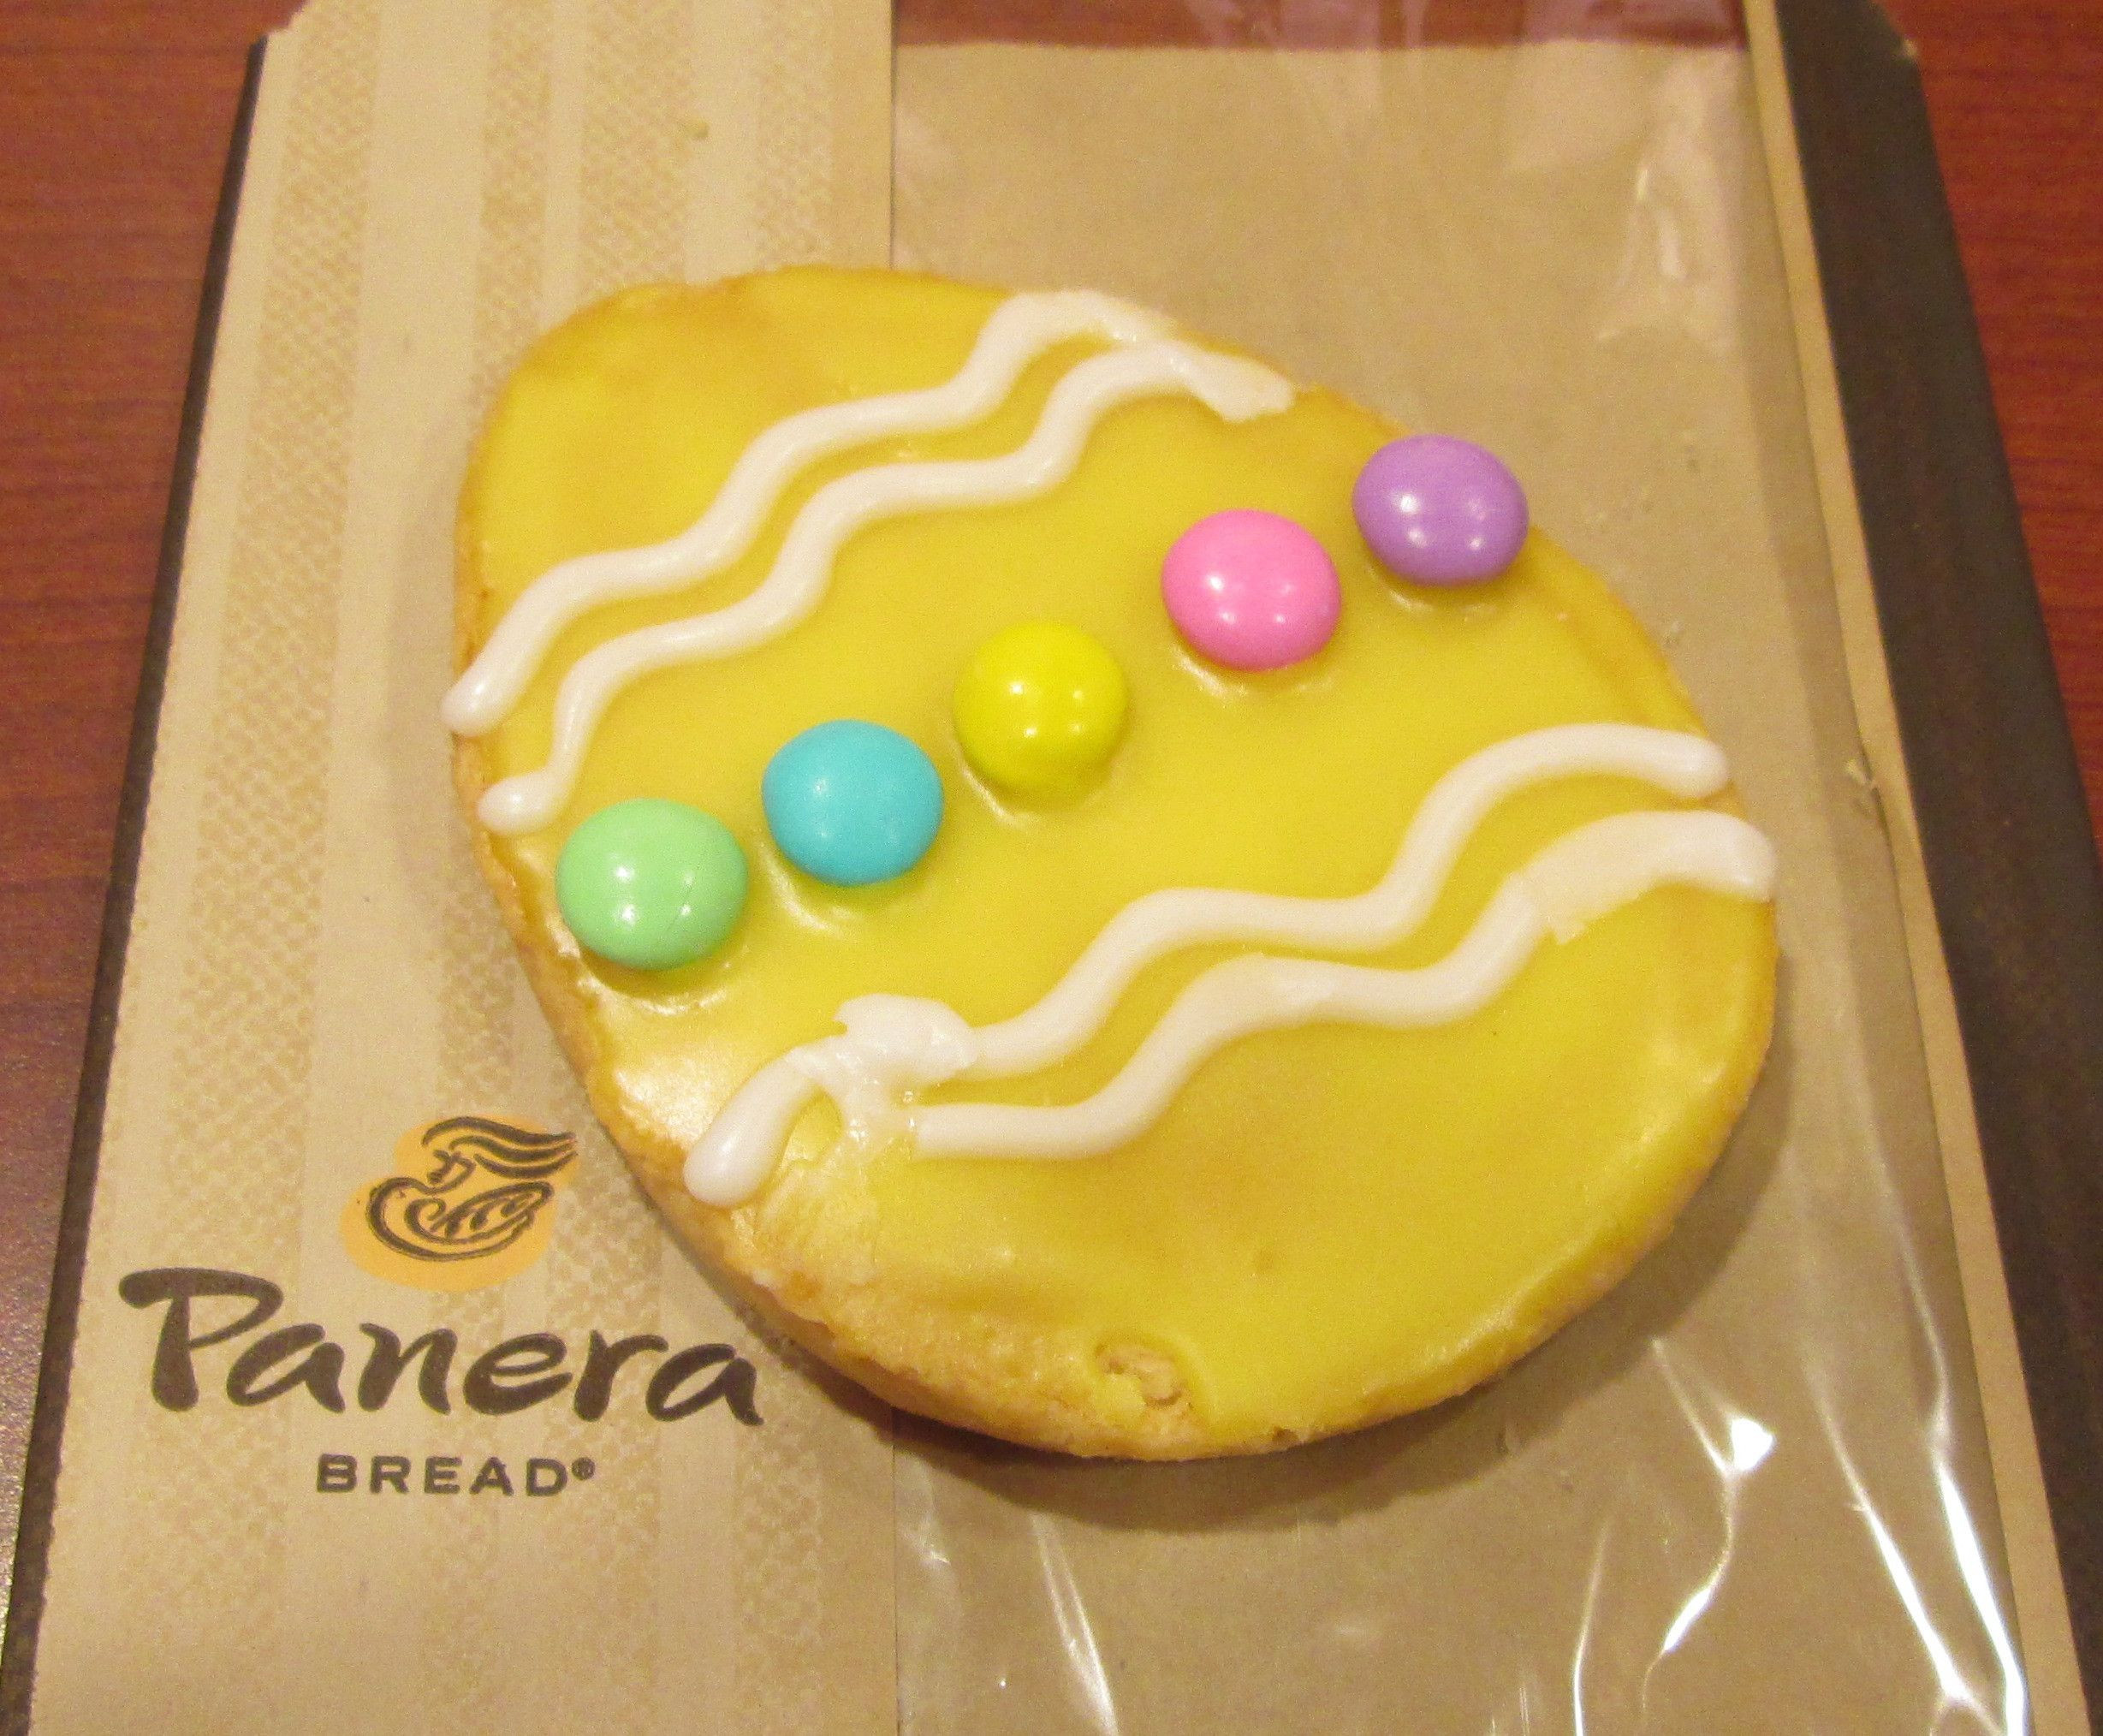 Panera Bread Easter
 20 the Best Ideas for Panera Bread Easter The Best